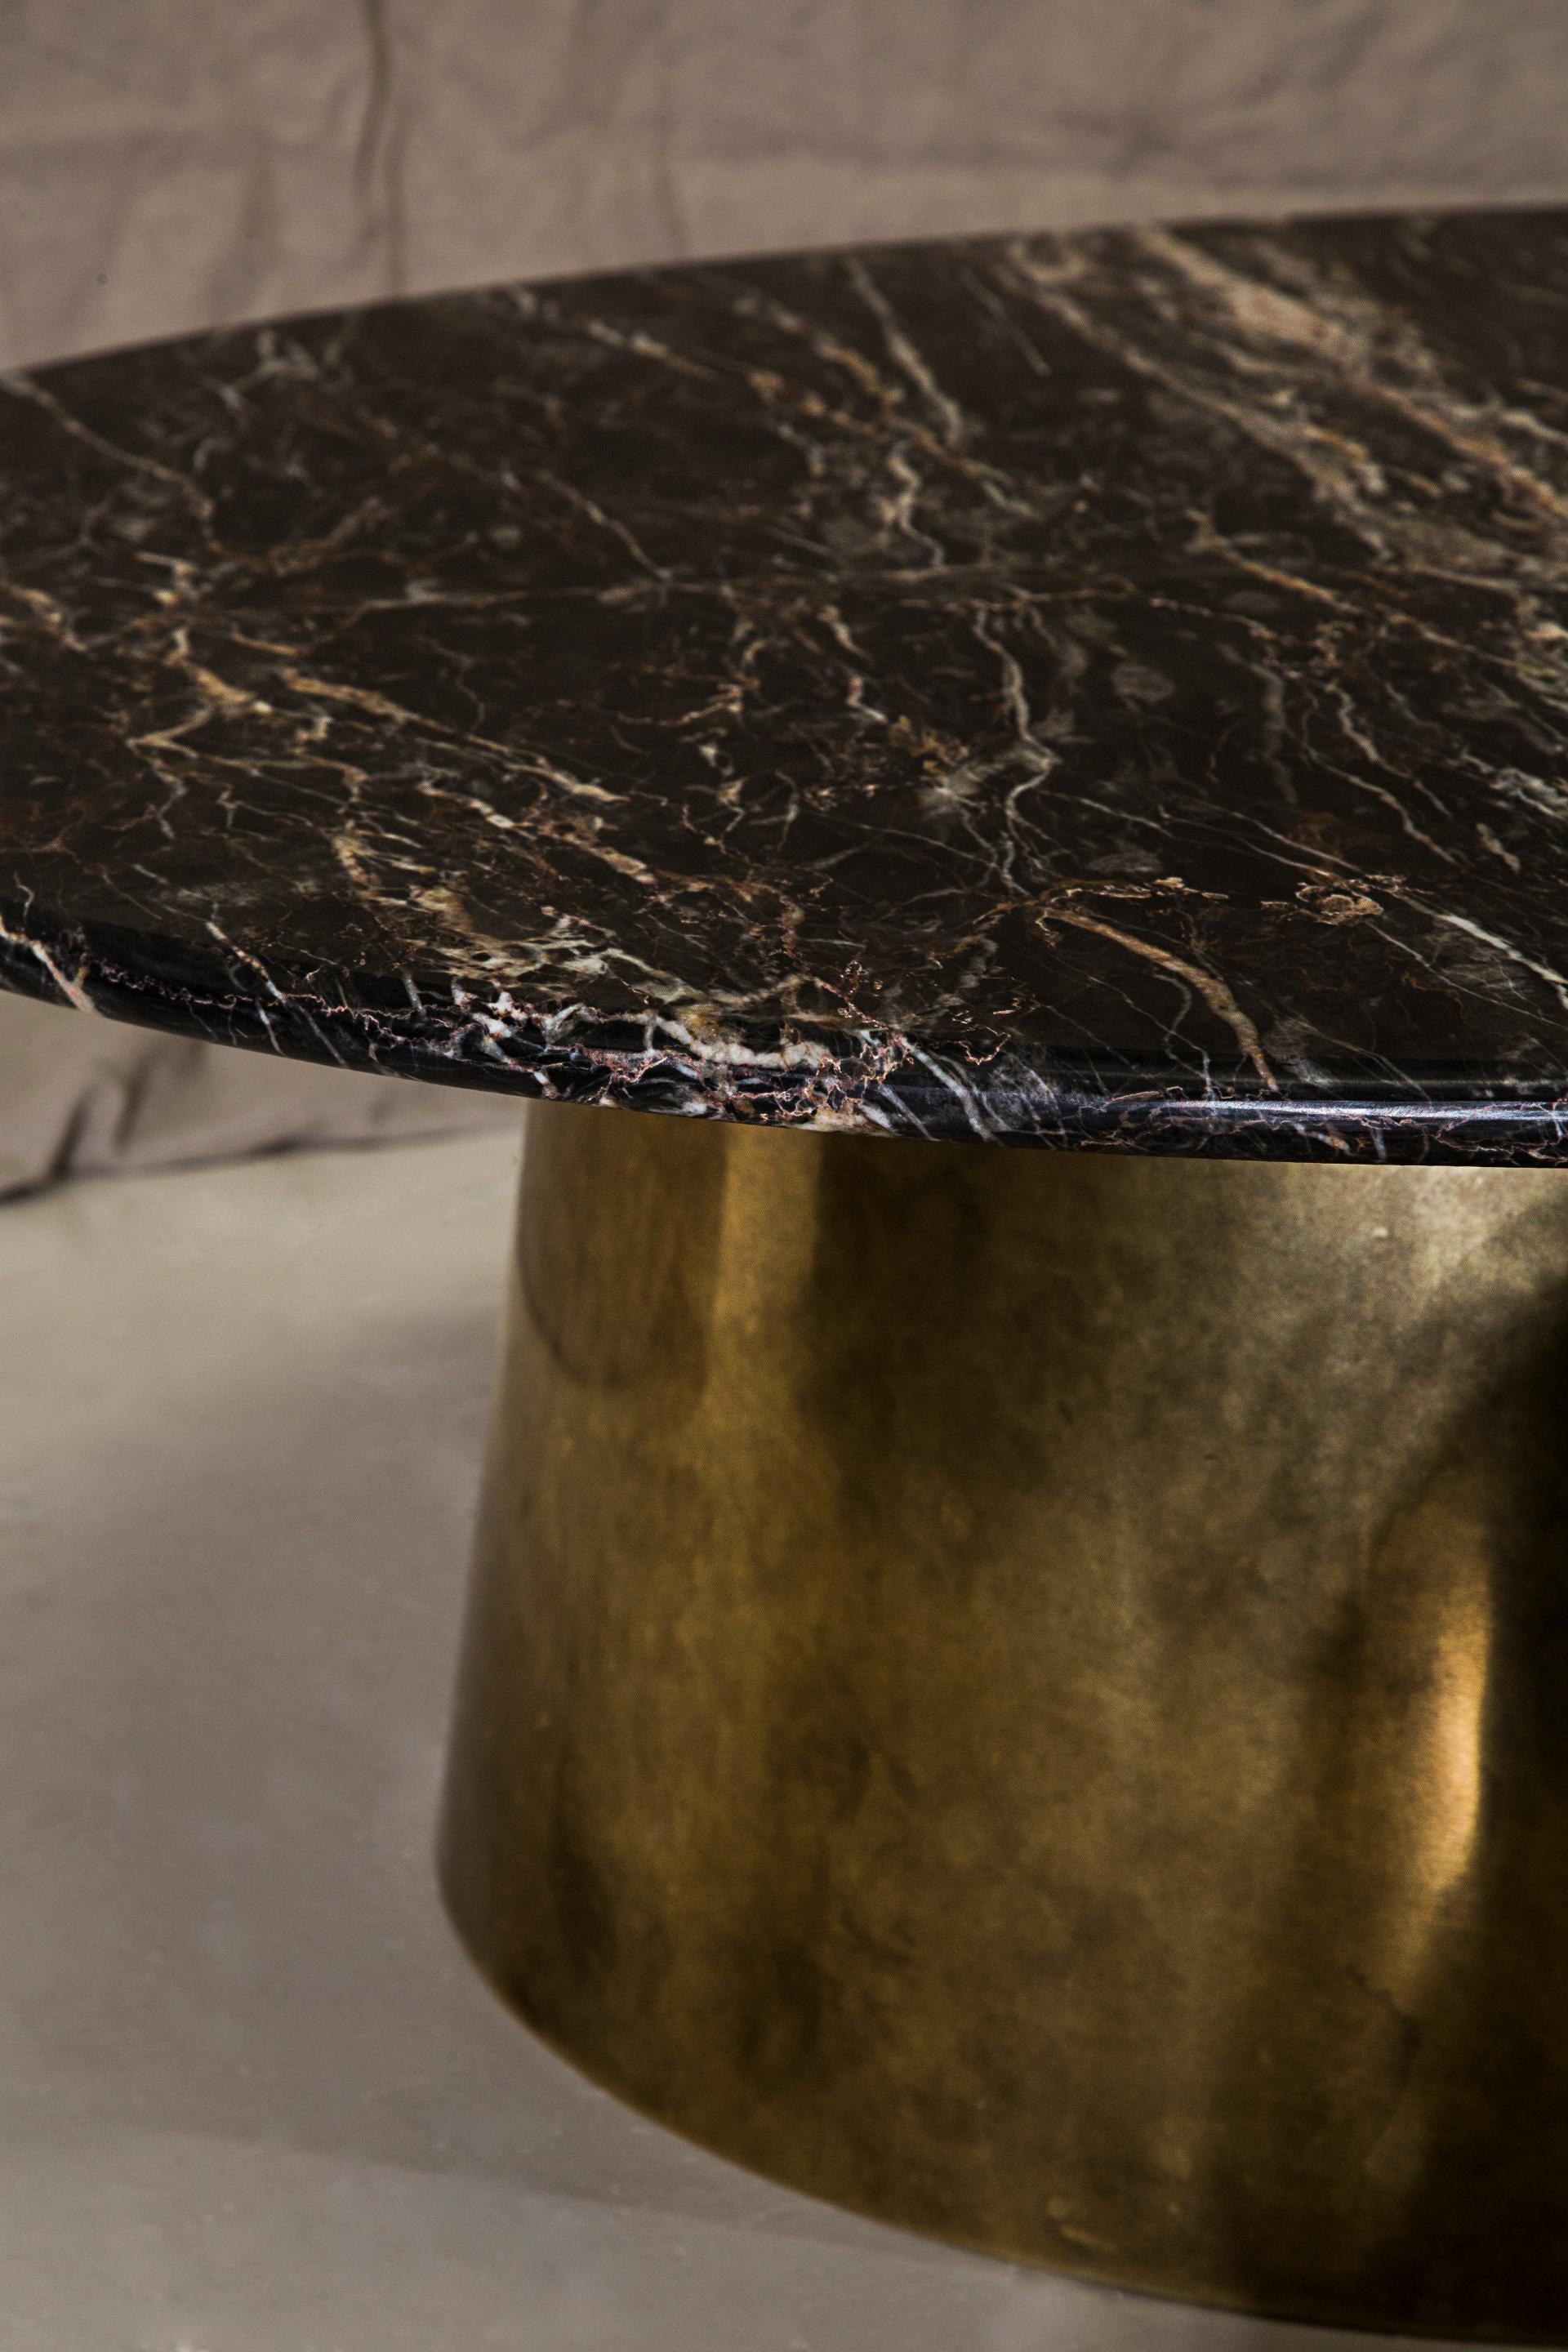 Brass and marble coffee table signed by Novocastrian
Dimensions: 35 x 100 x 100 cm
Materials: Rare British Marble (subject to availability), base in Patinated Brass
Each iteration is a truly unique creation, many of the available marbles will never